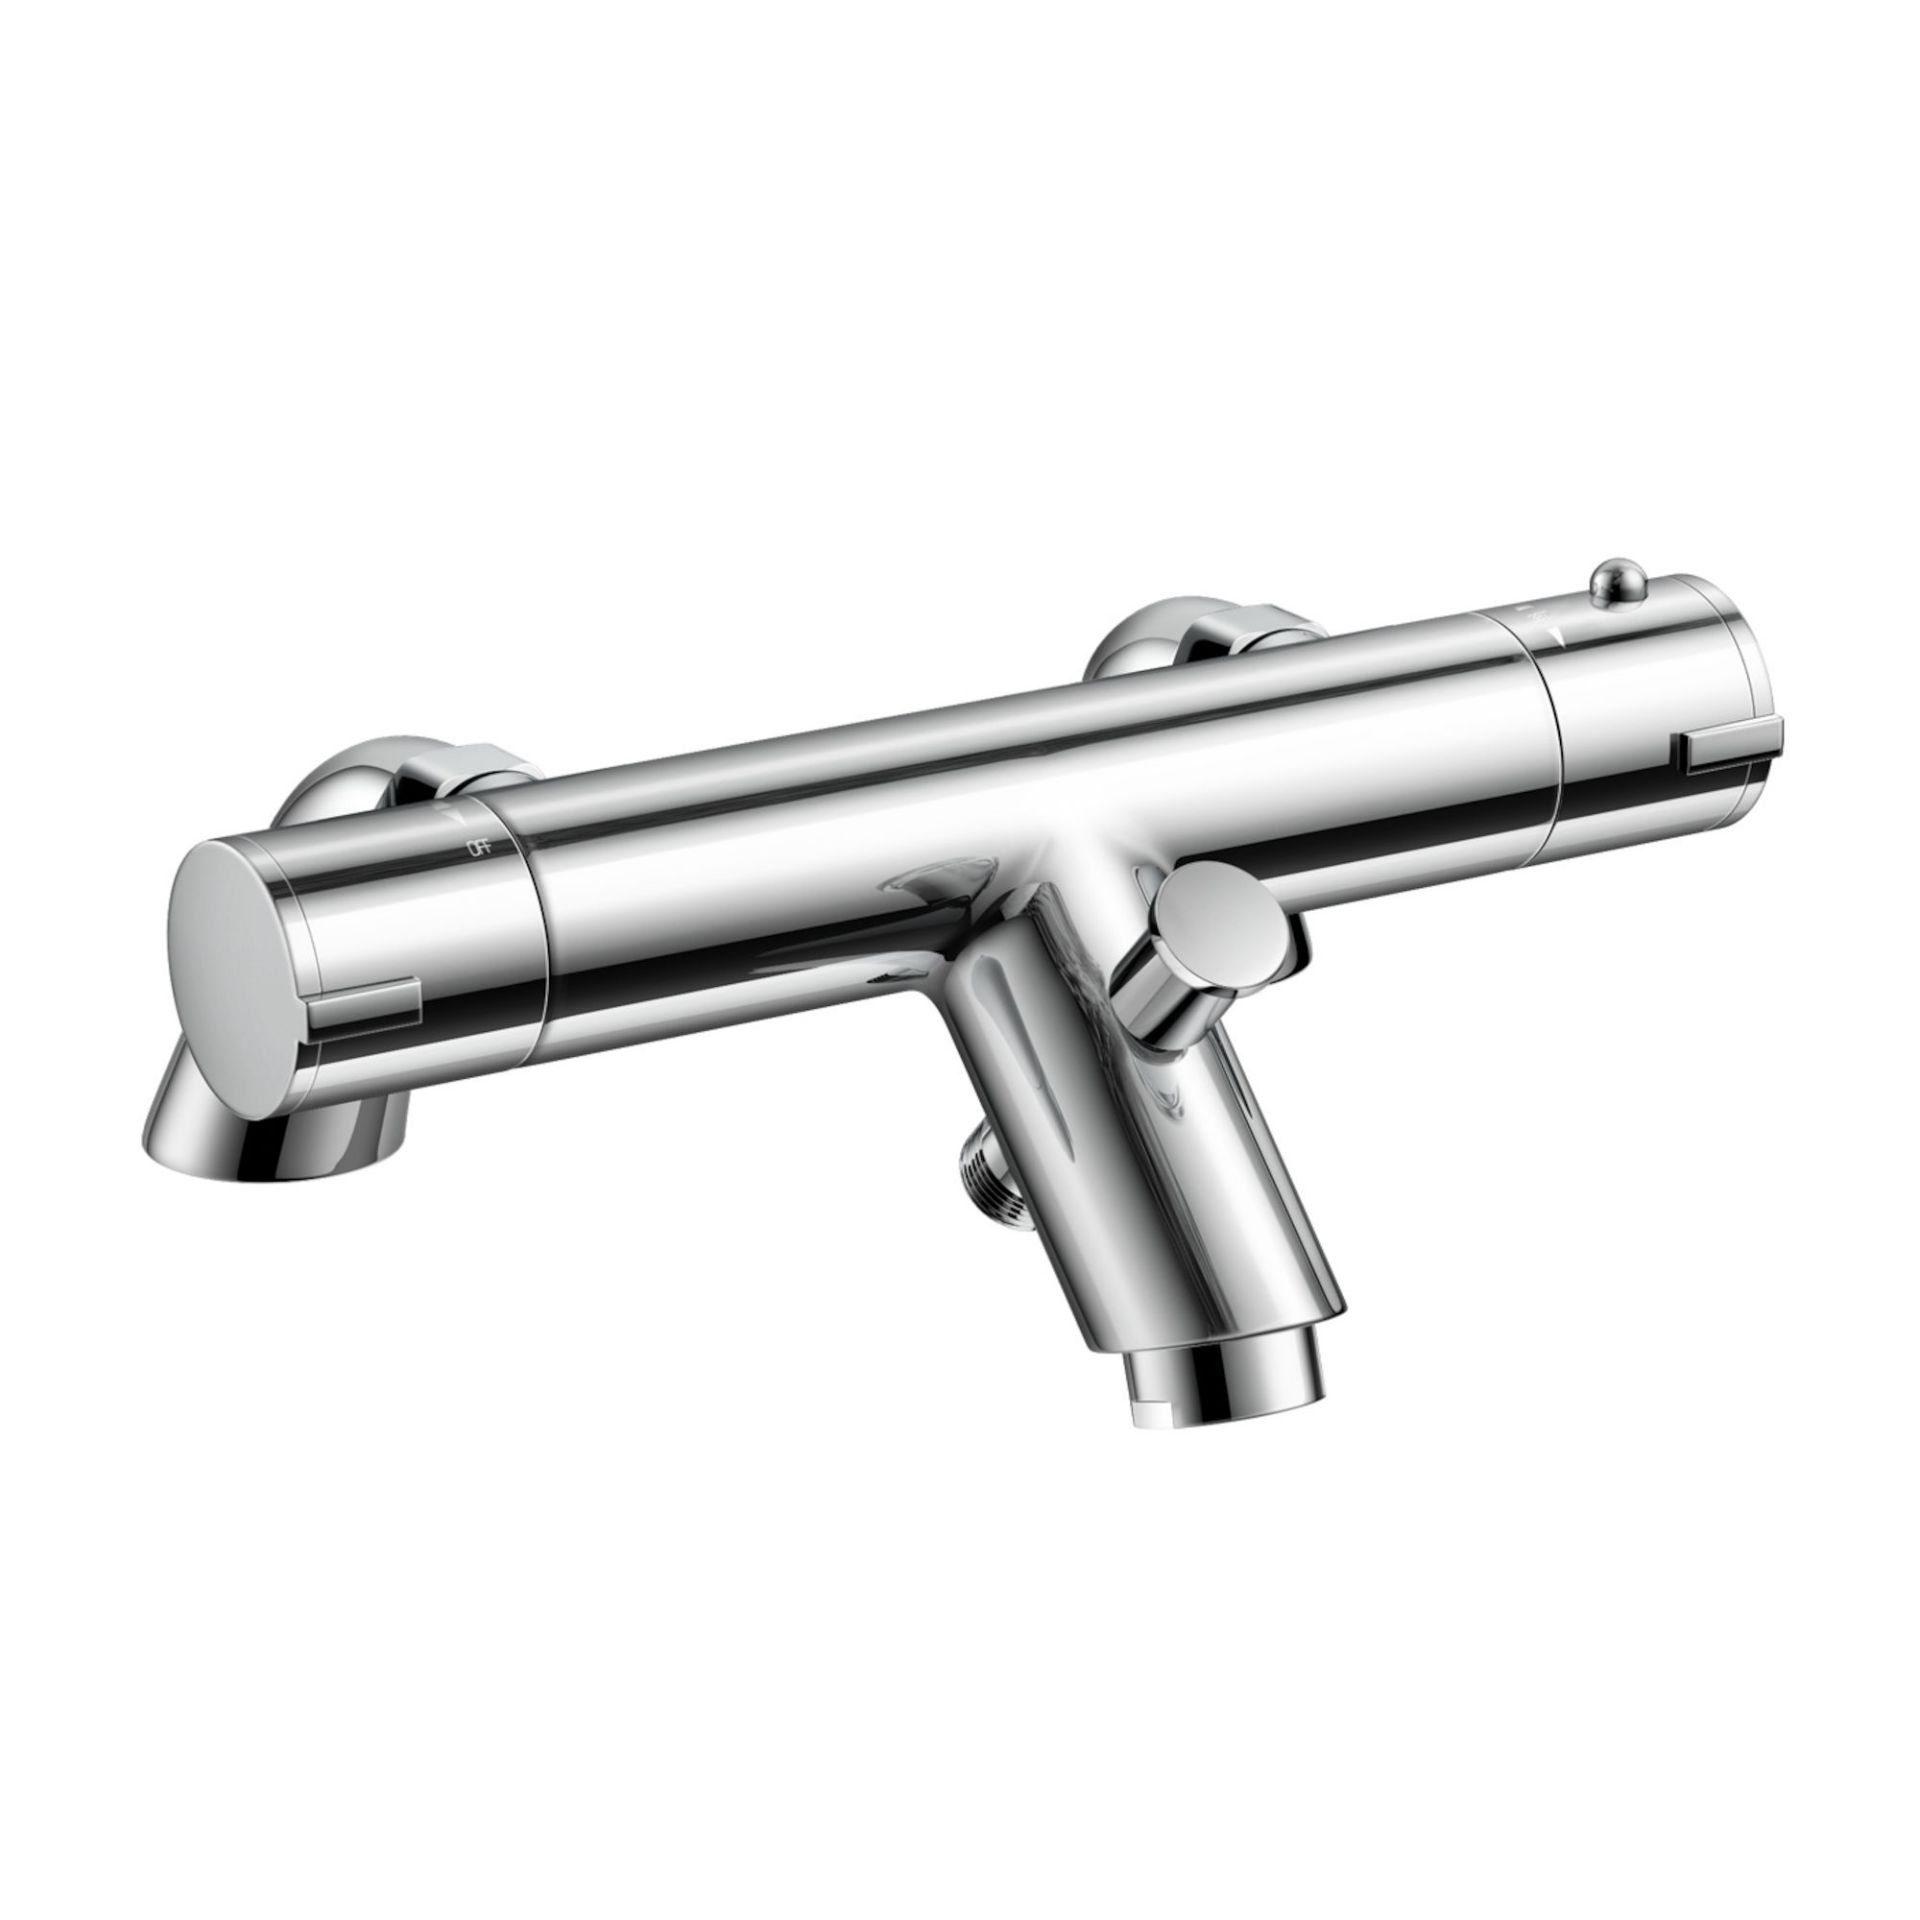 (MP11) Thermostatic Deck Mounted Shower Mixer and Bath Filler. . Chrome plated solid brass mixer